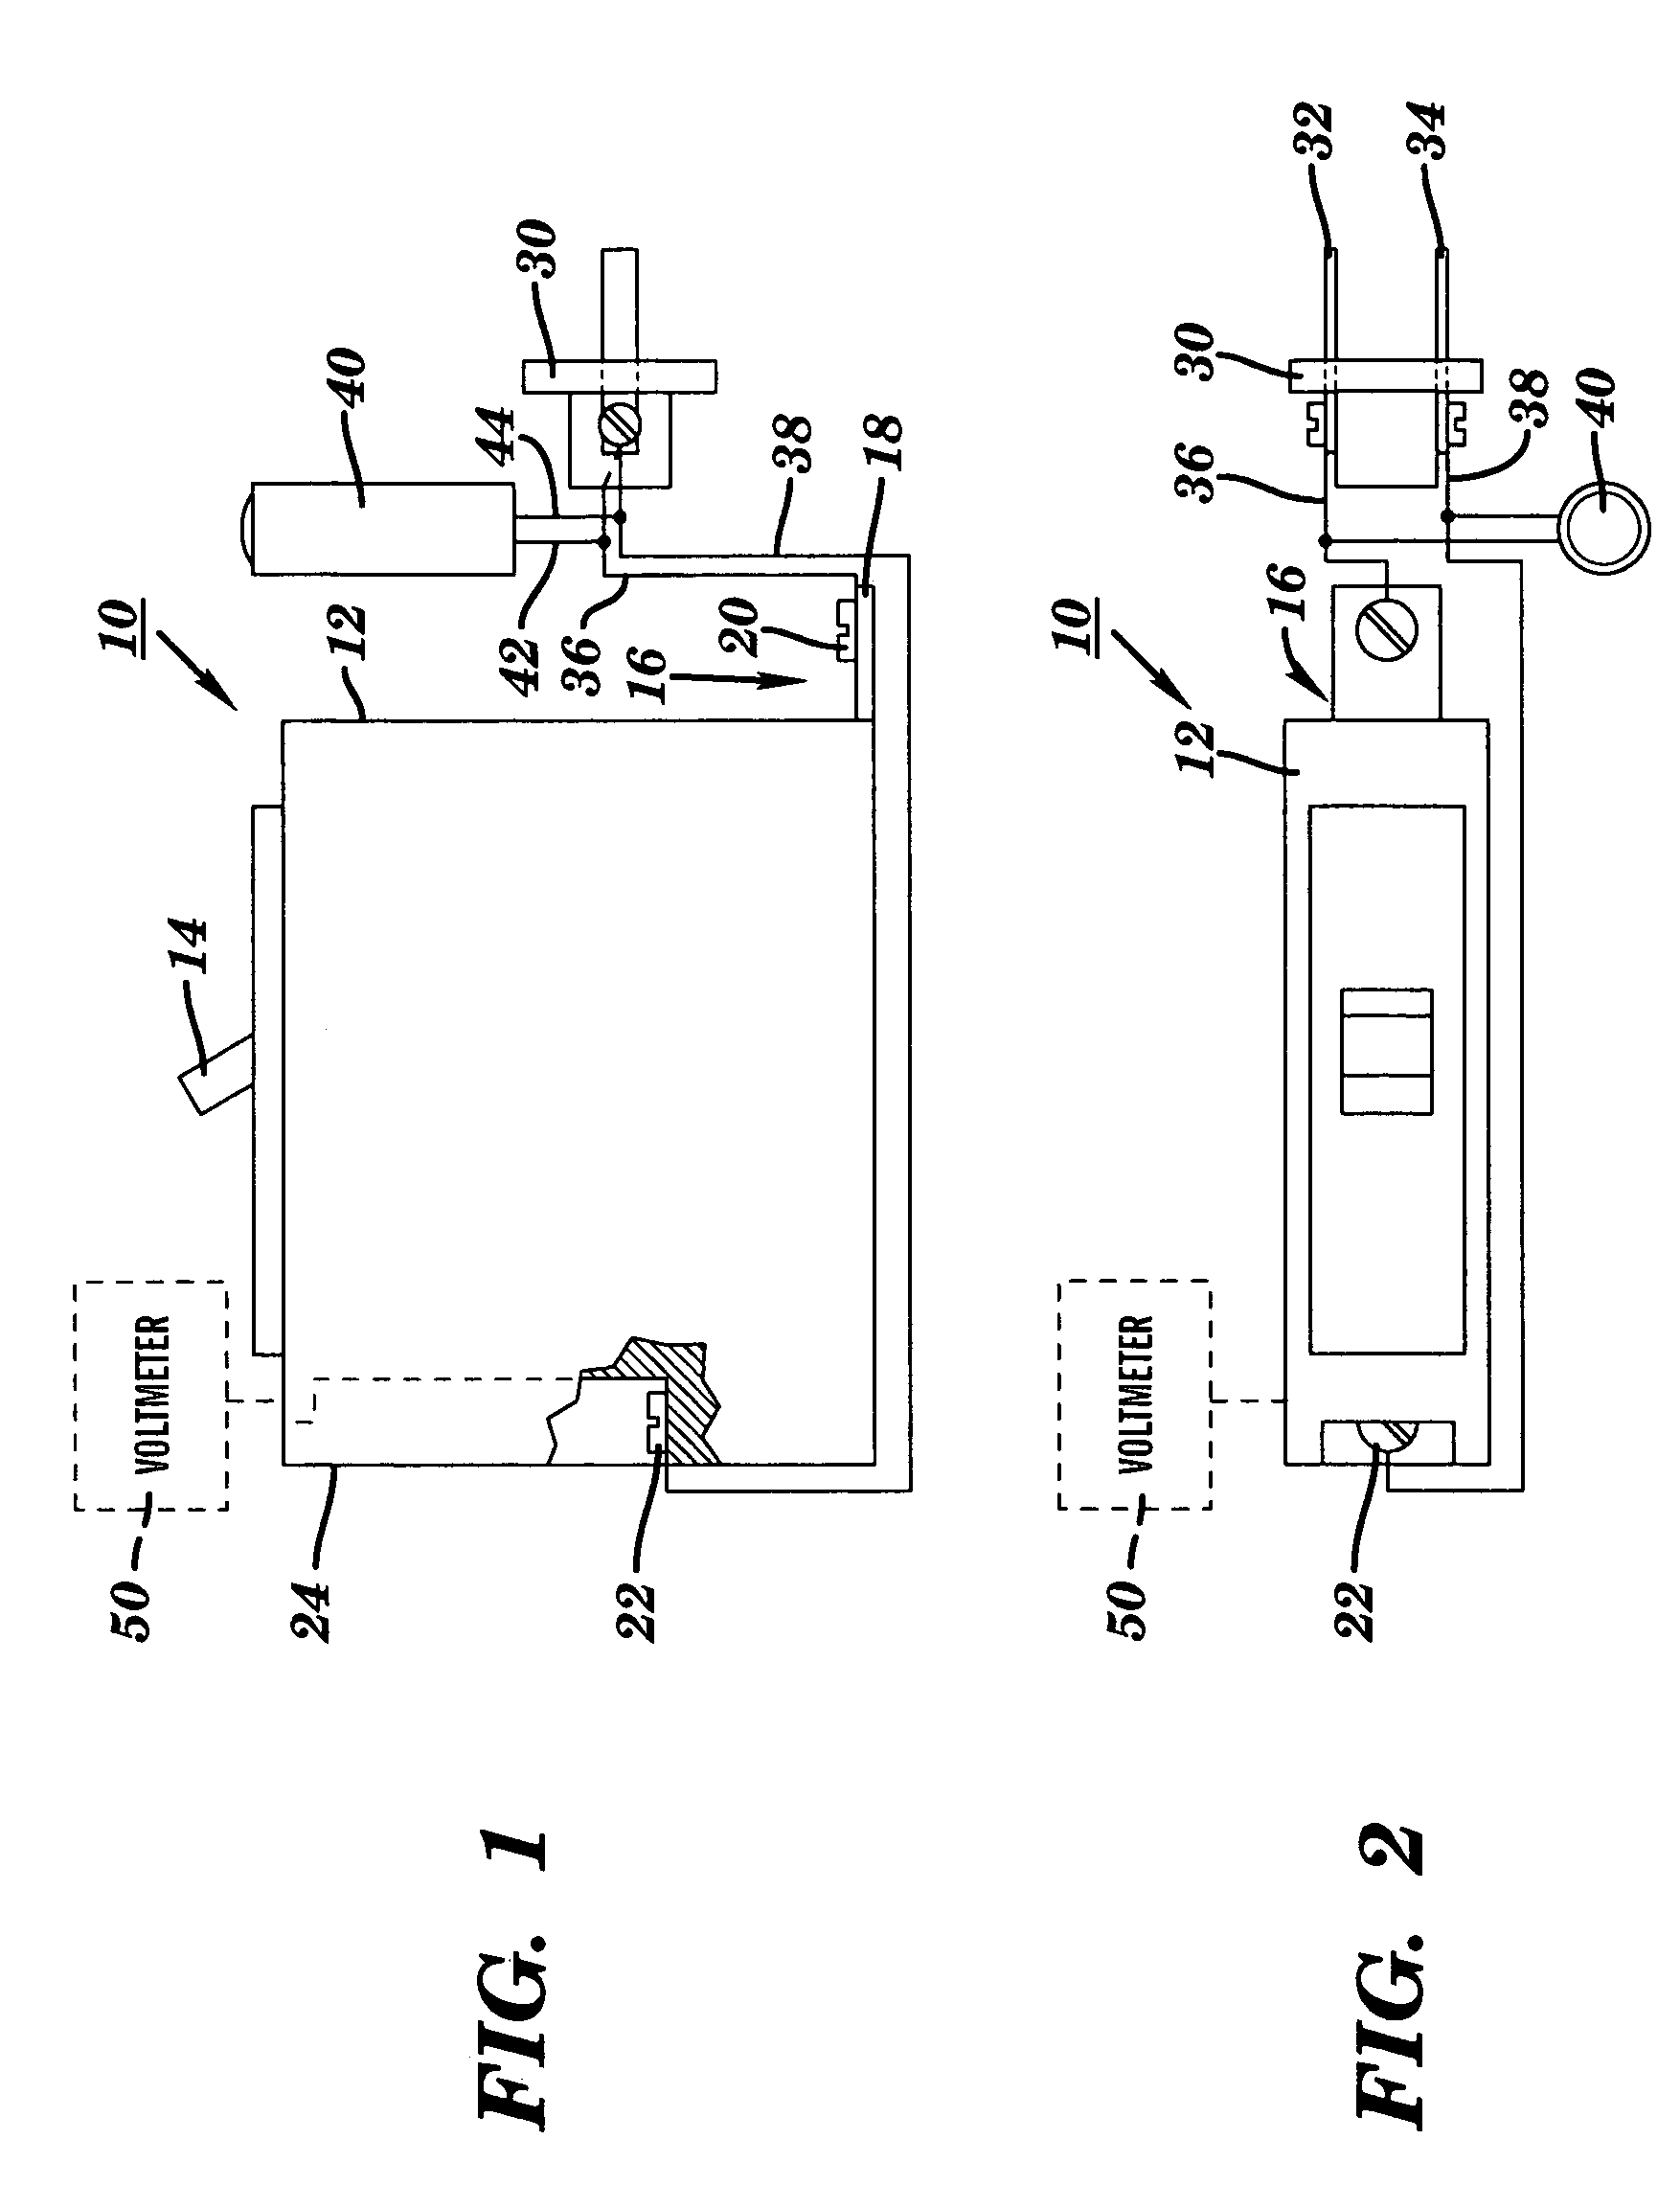 Article for de-energizing a branch electrical circuit, and related processes